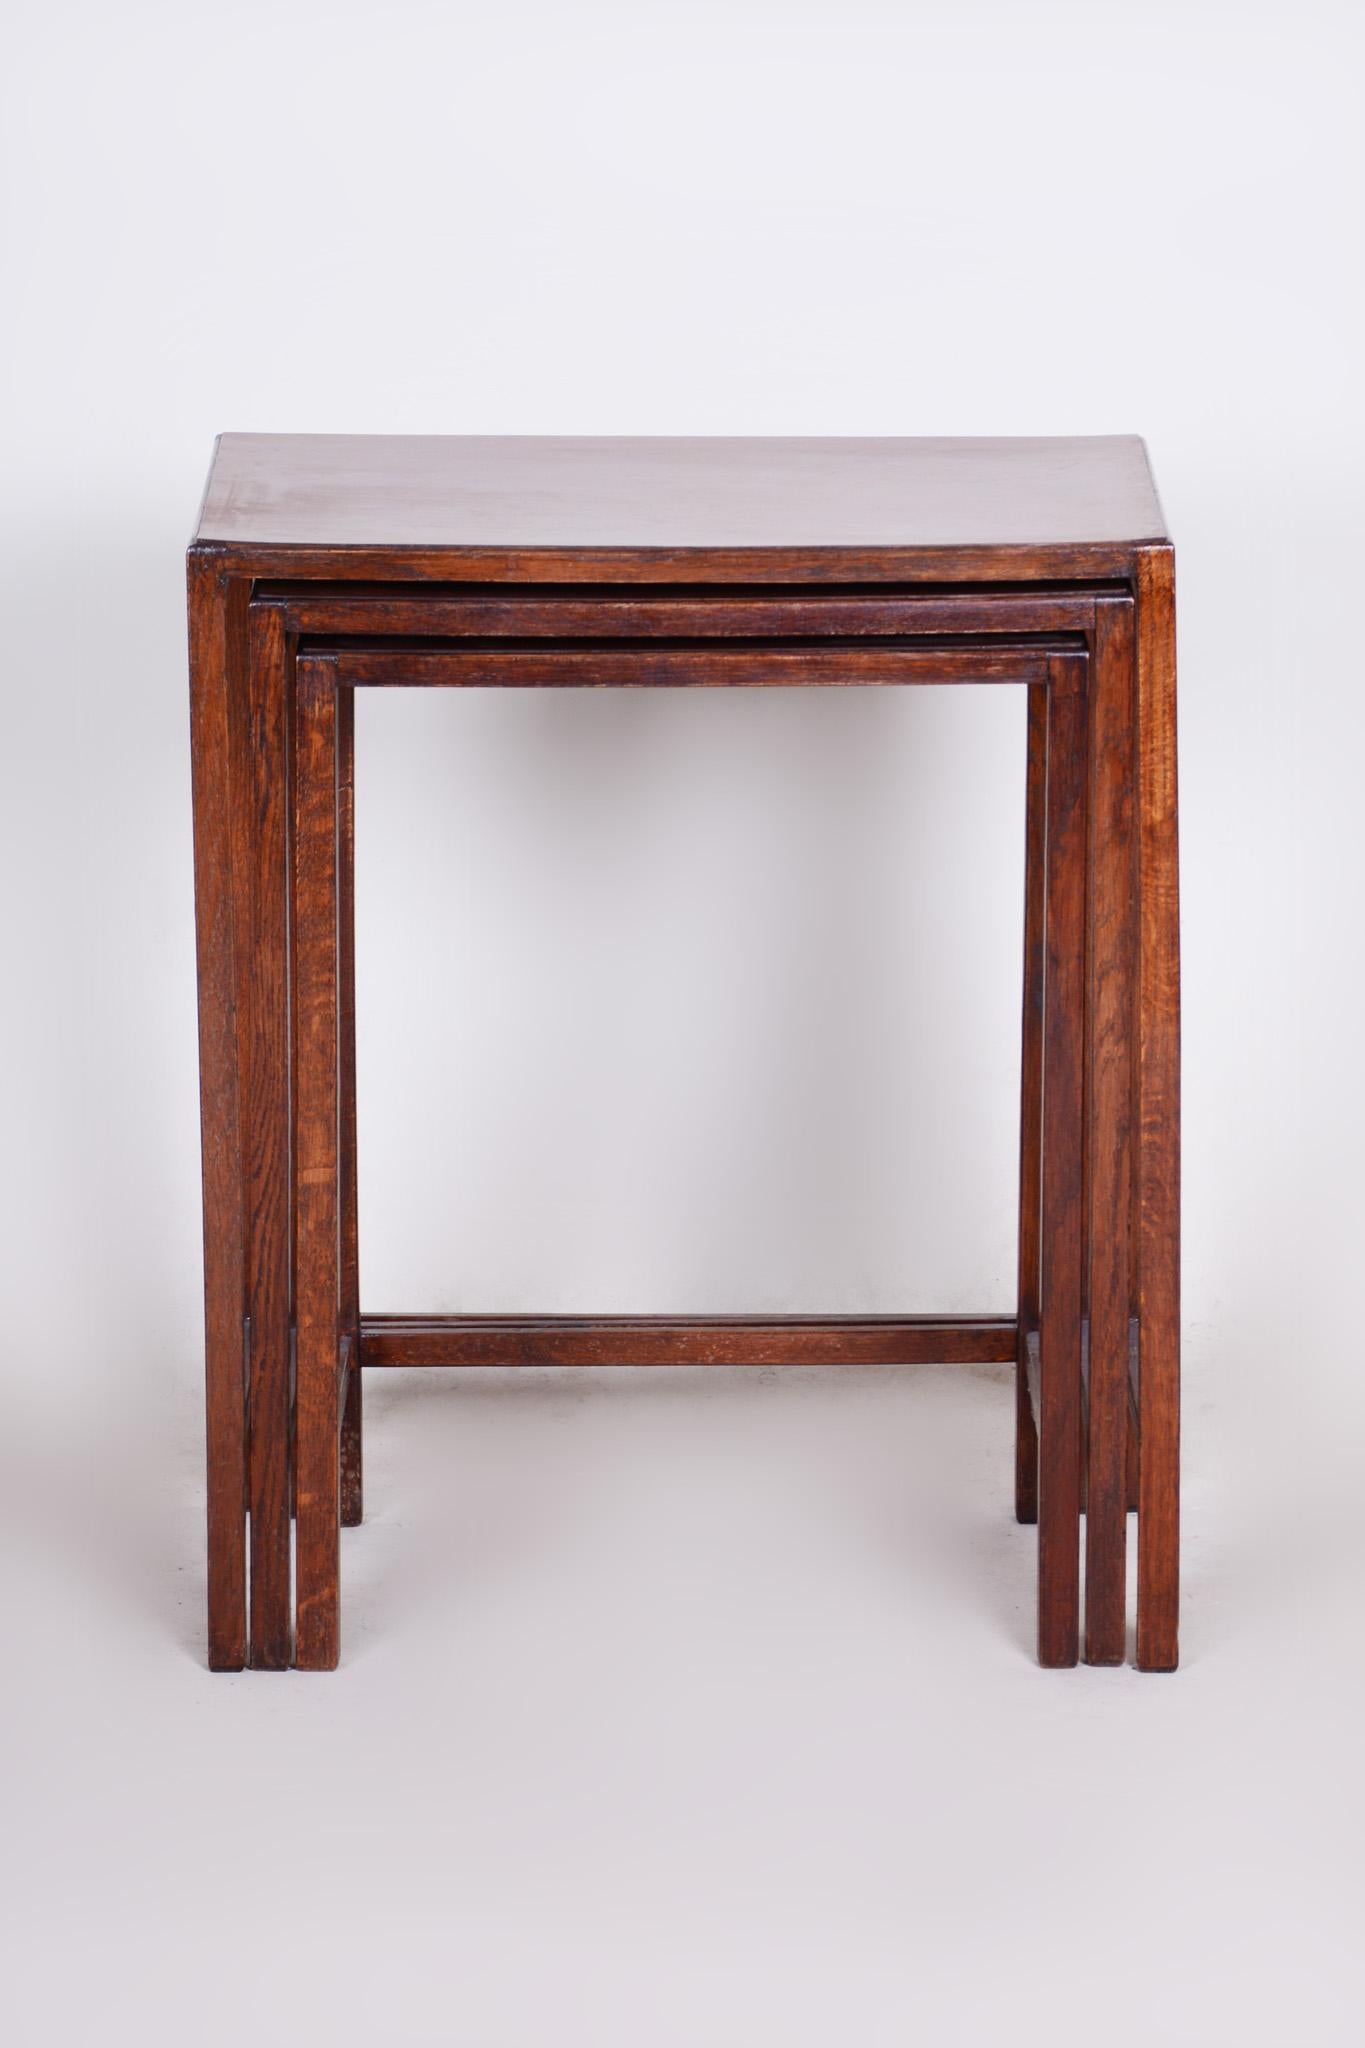 Beautiful brown nest tables made in the 1960s, they are made out of wood
Made by Halabala.